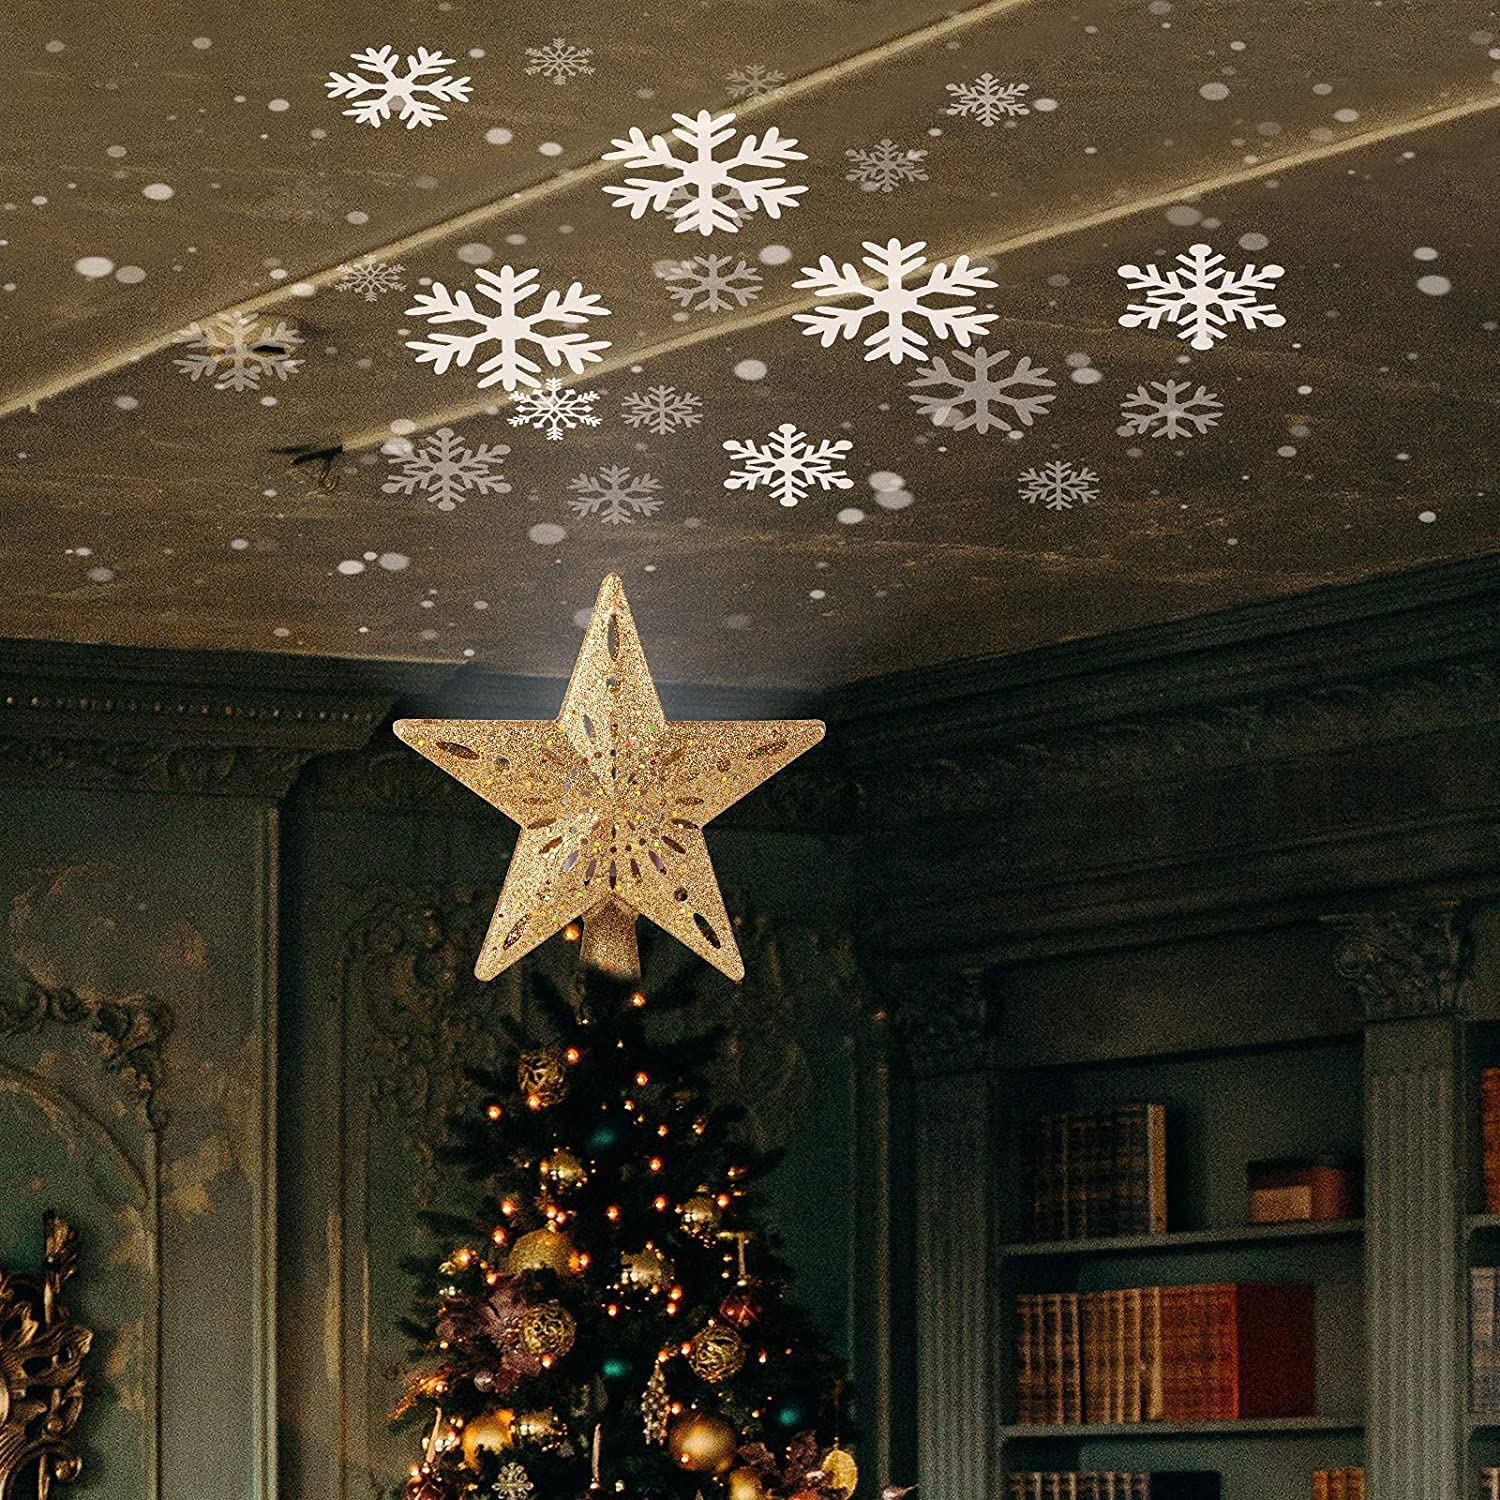 Christmas Star Tree Topper with Built-in LED Snowflake Projector Lights